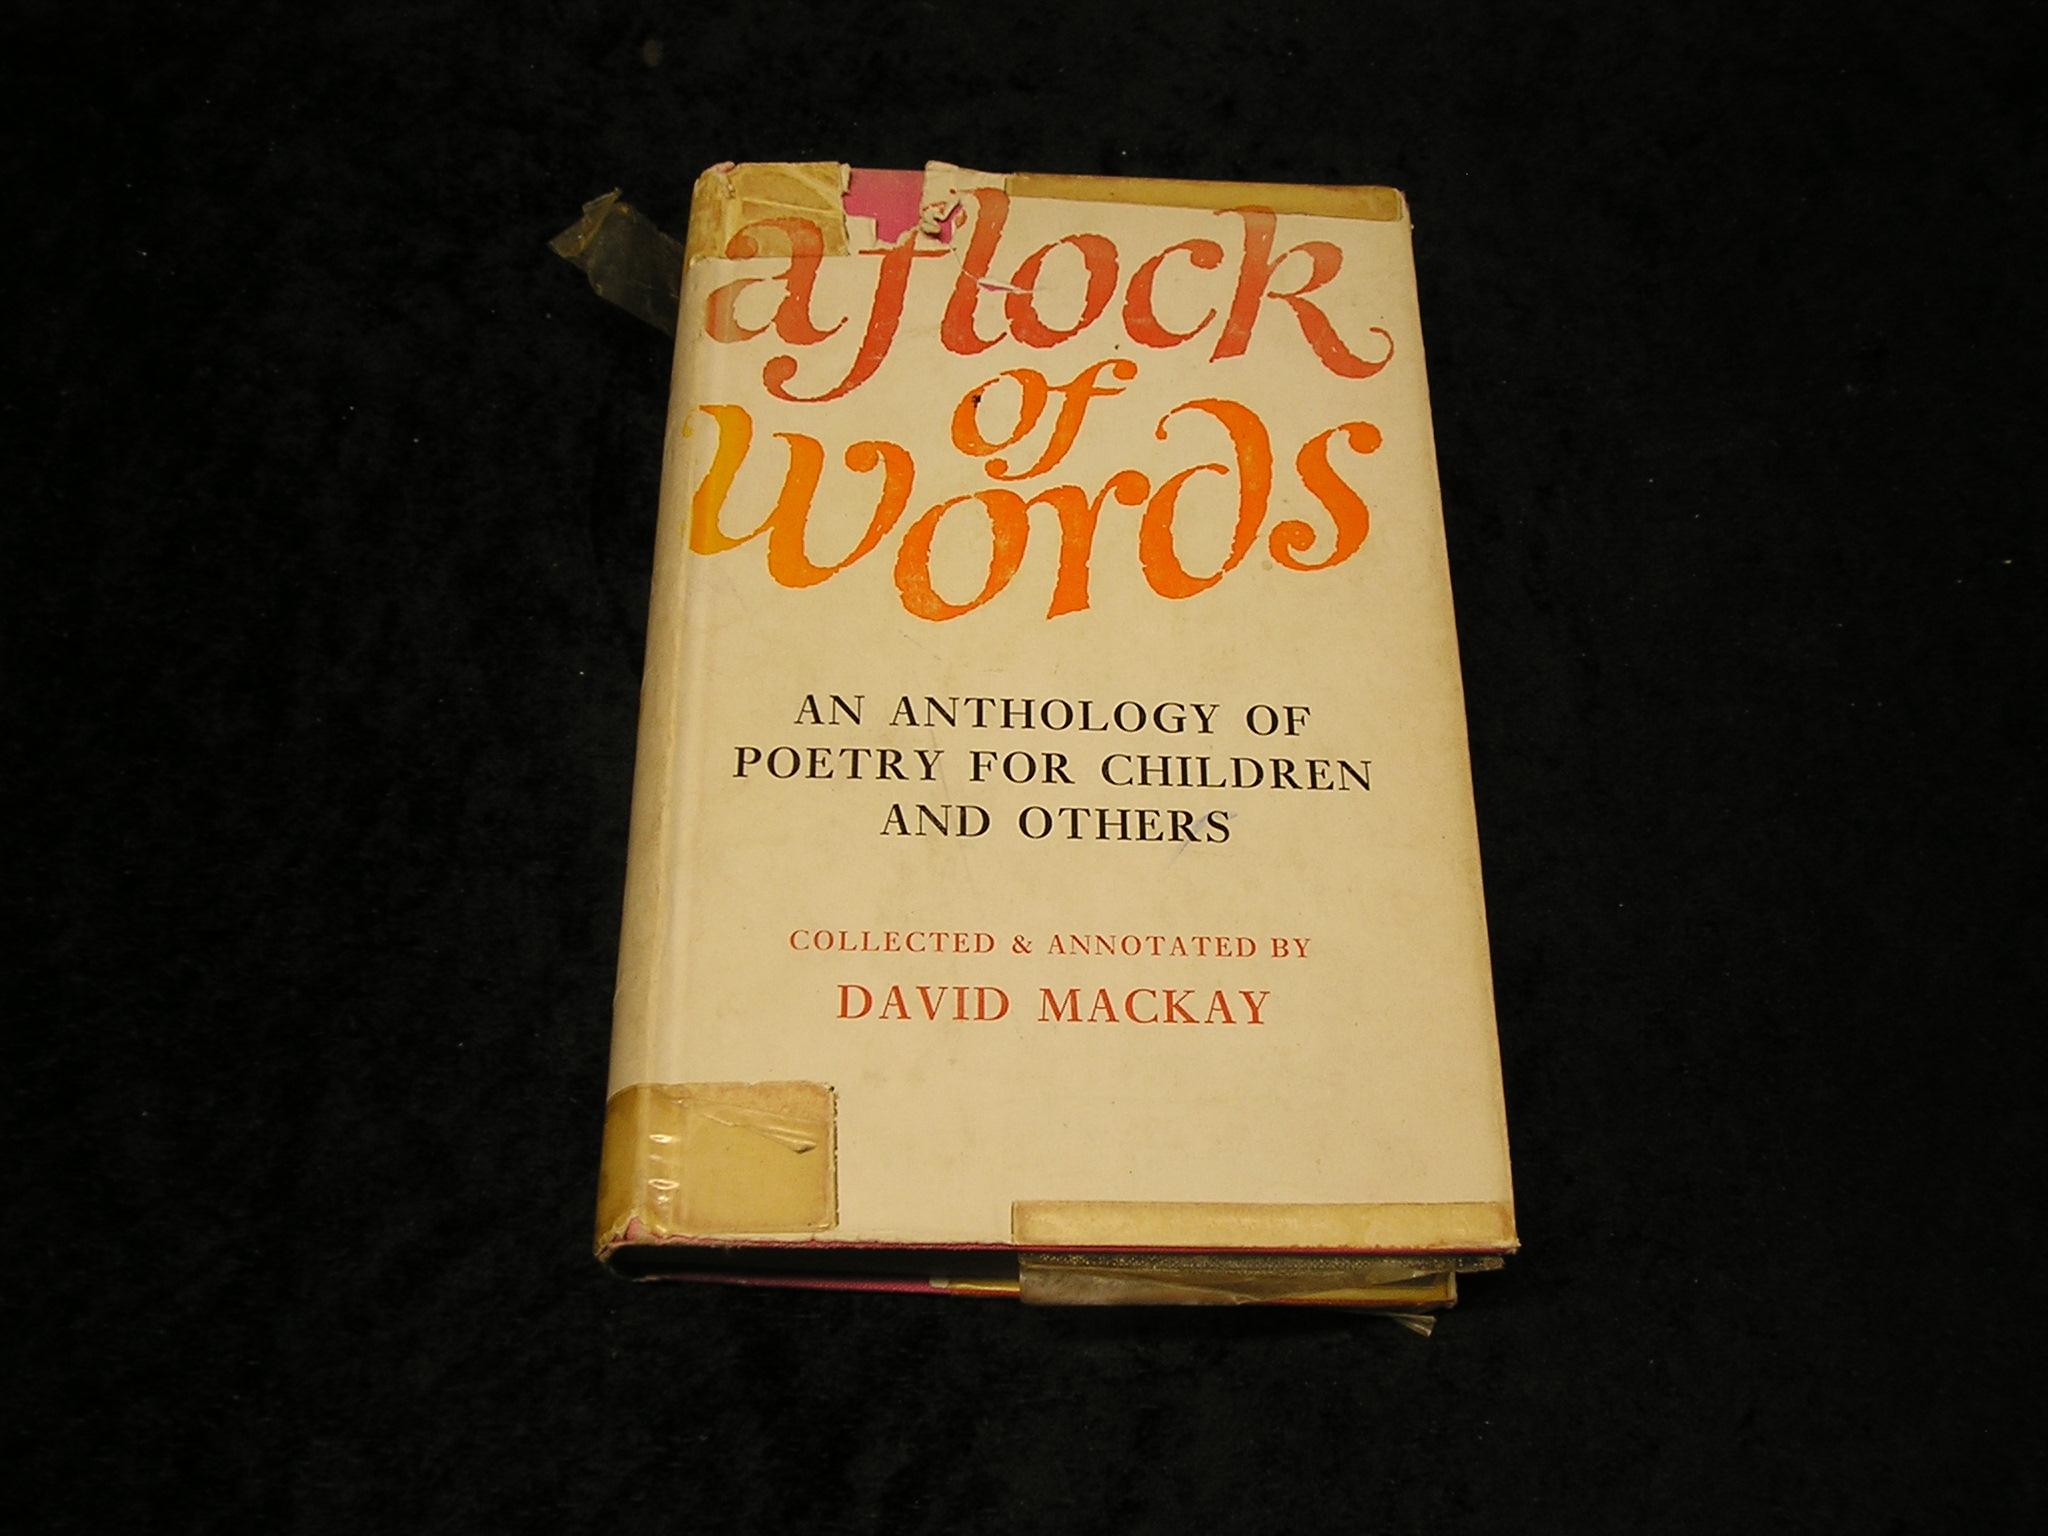 A Flock of Words